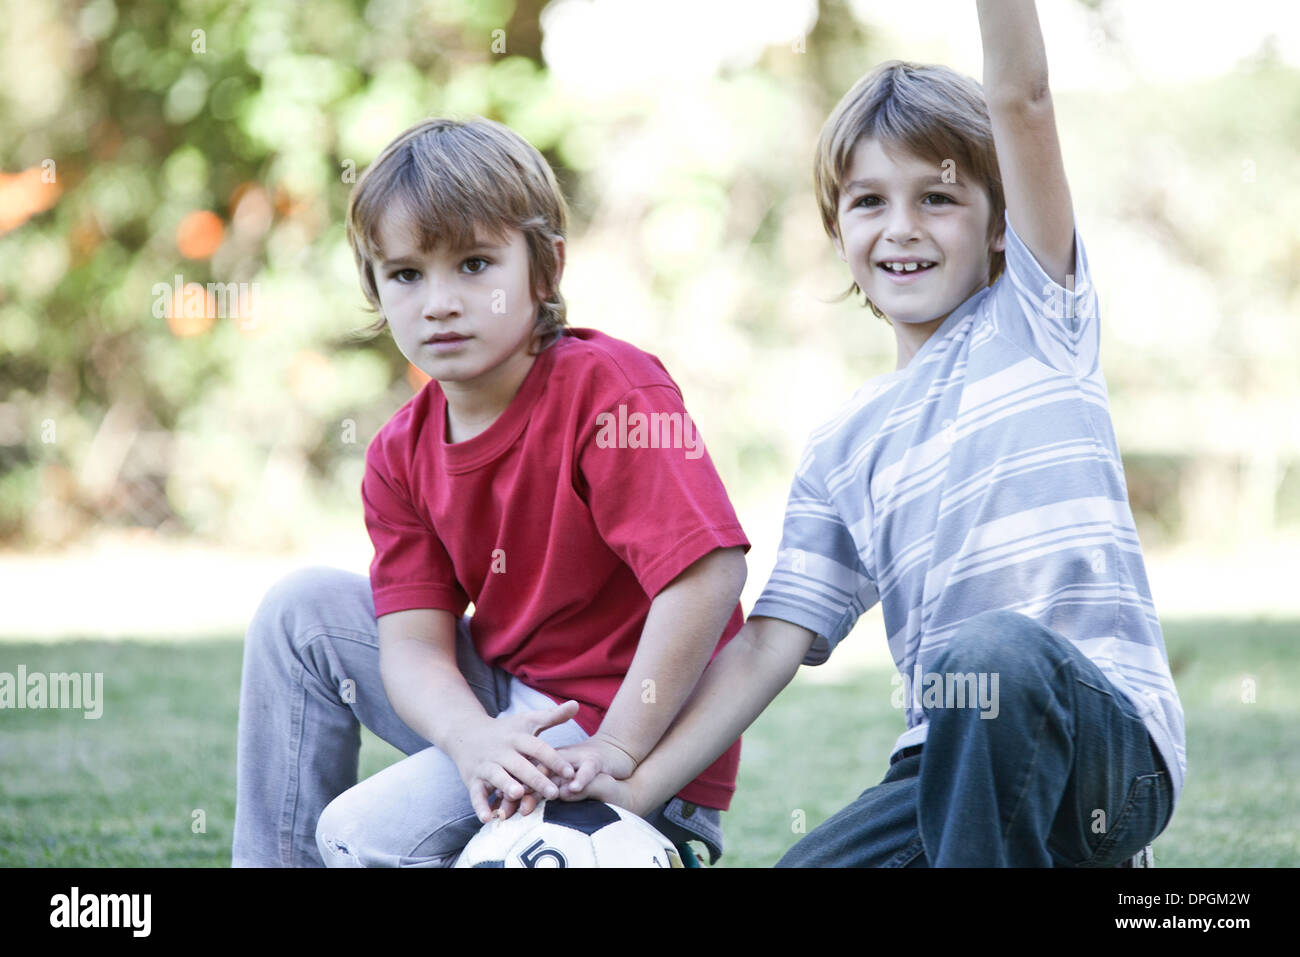 Boys crouching on field with soccer ball, one boy cheering with arm in air Stock Photo